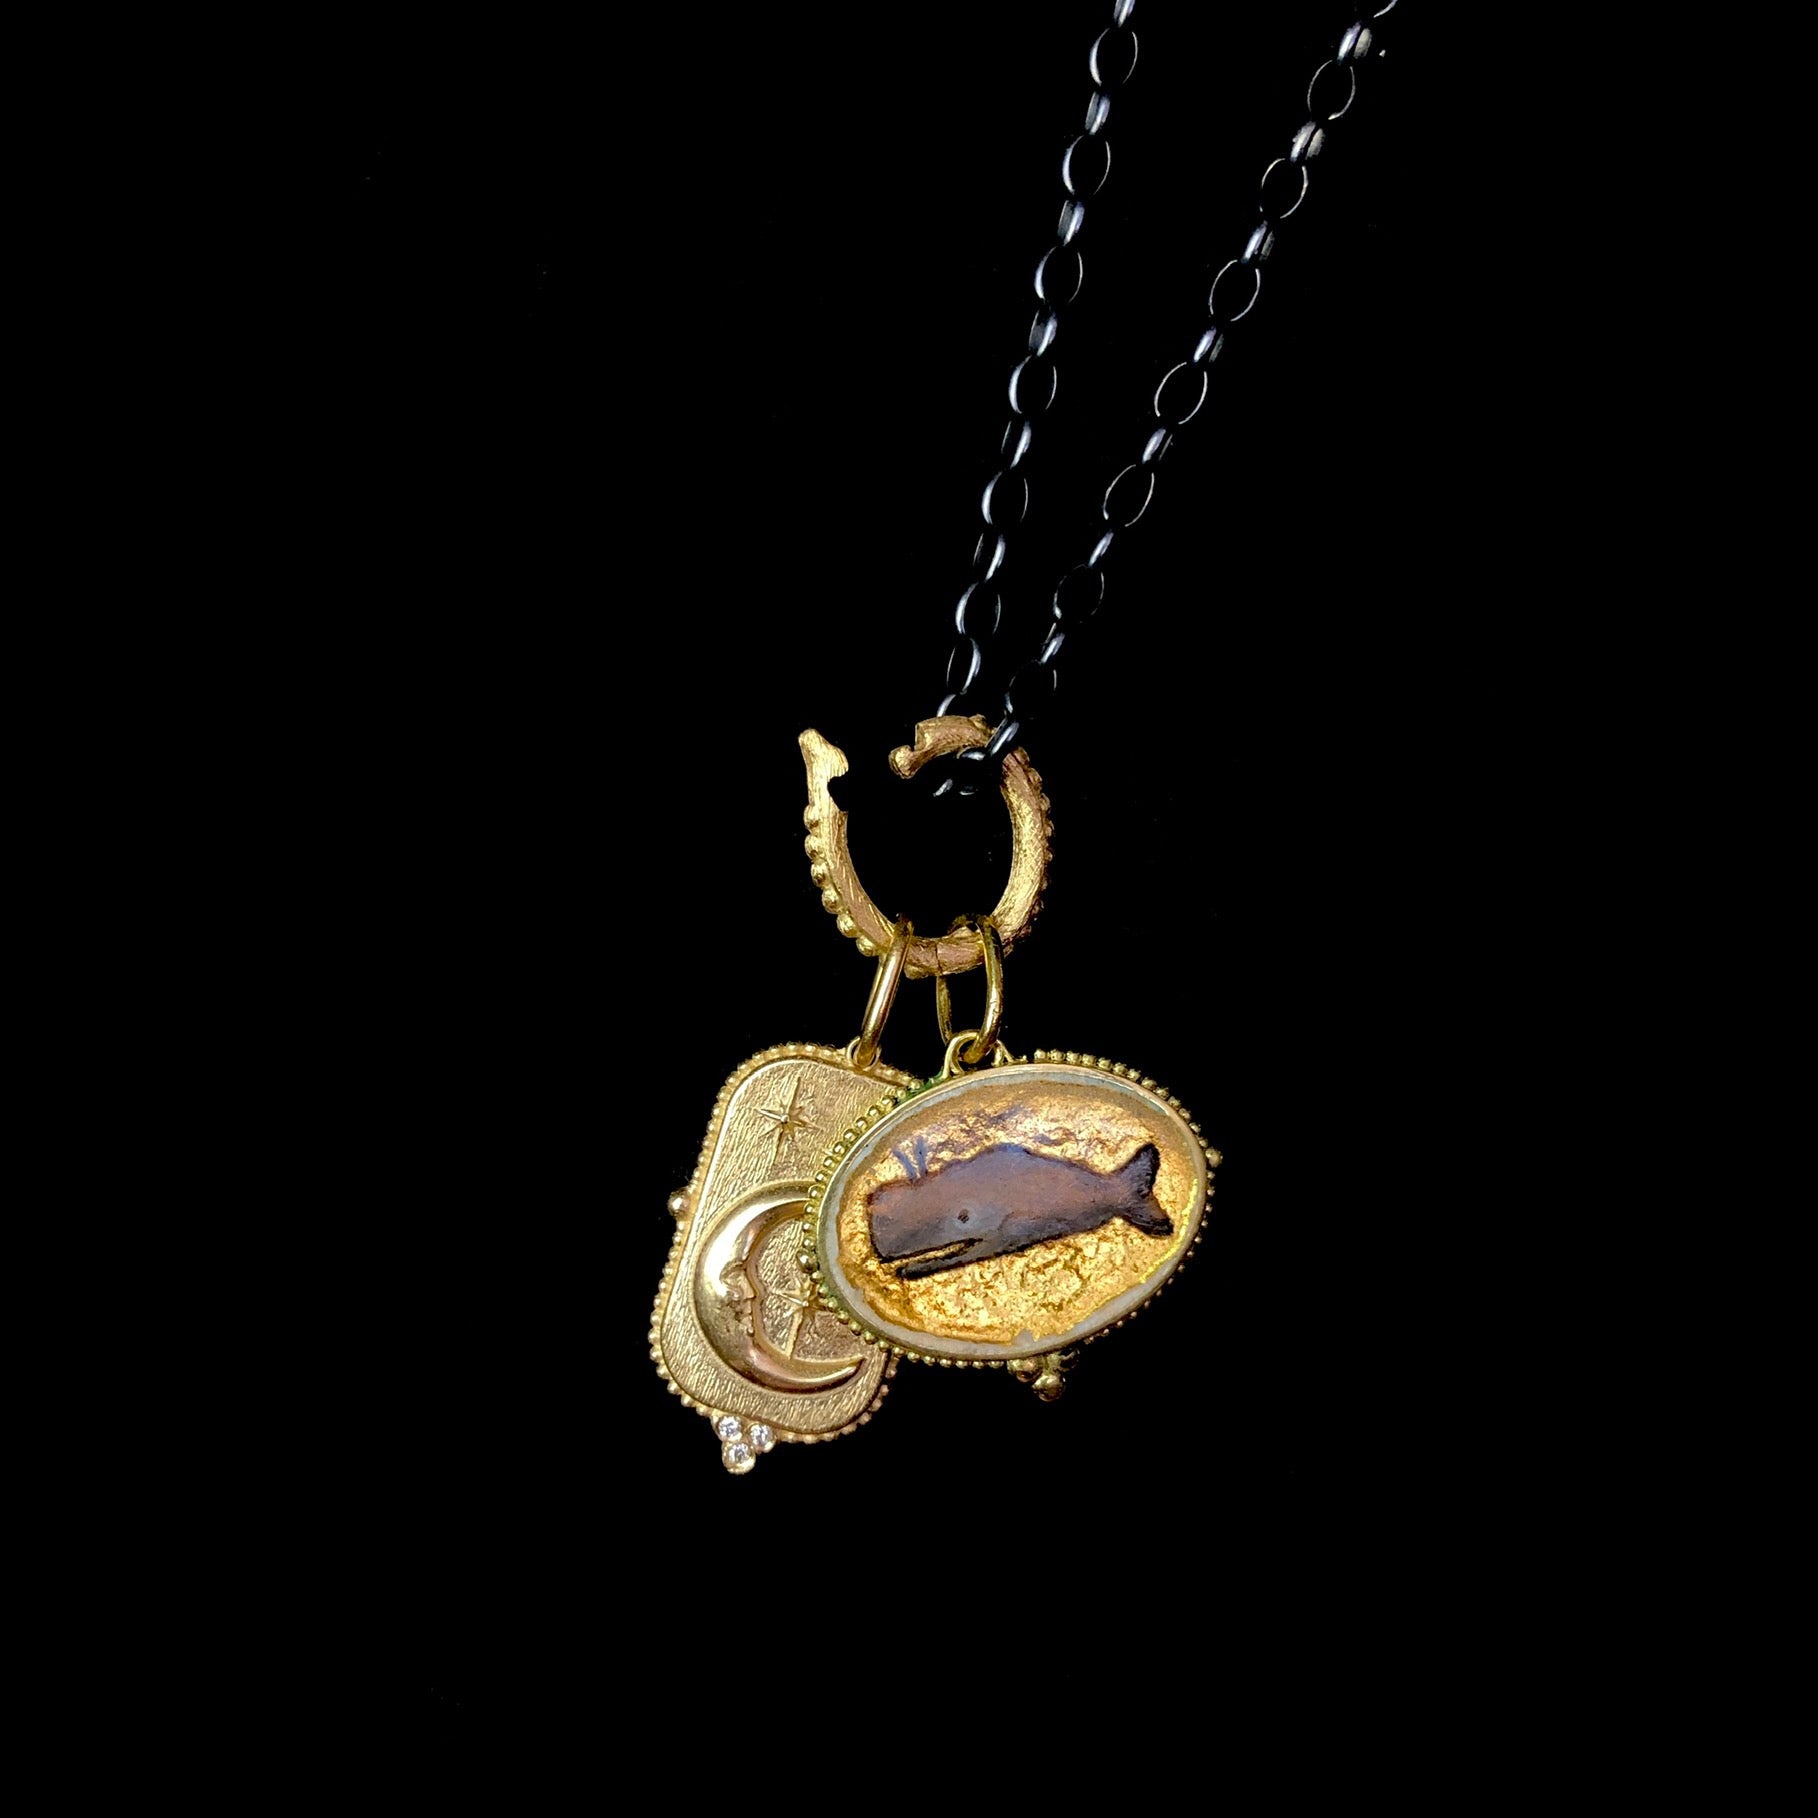 Gold Oval Charm Holder shown on chain with charms ready to be closed